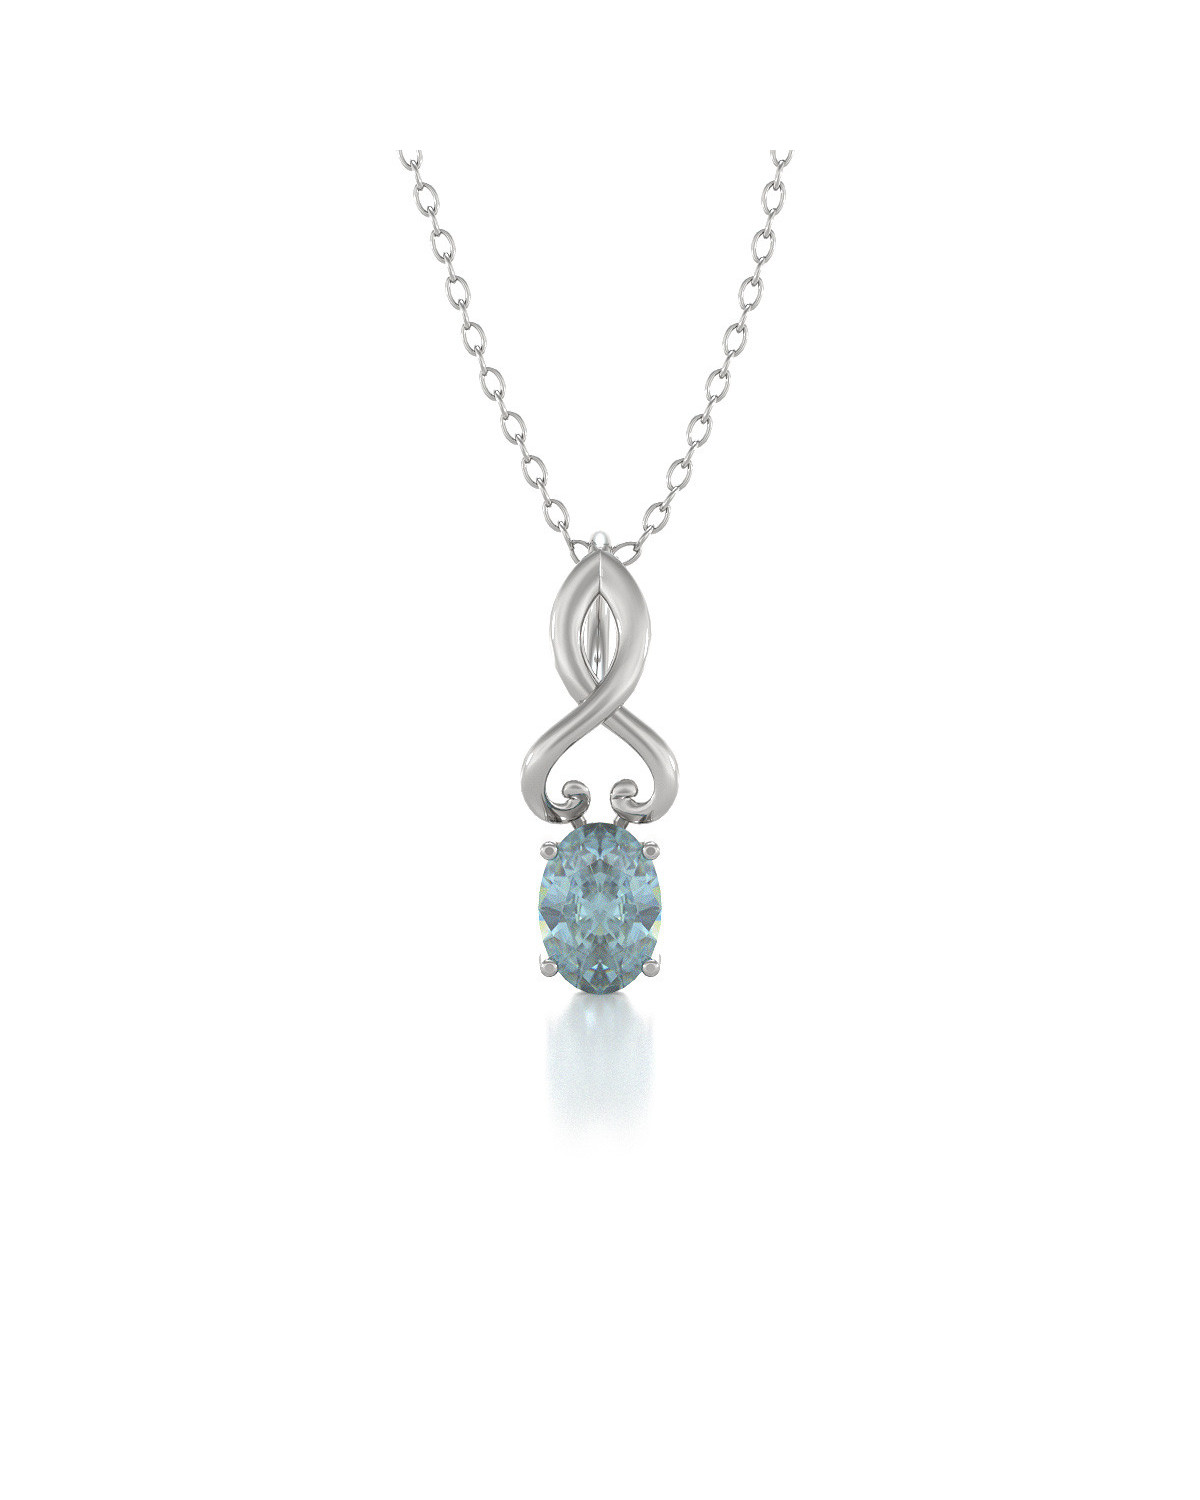 925 Silver Aquamarine Necklace Pendant Chain included